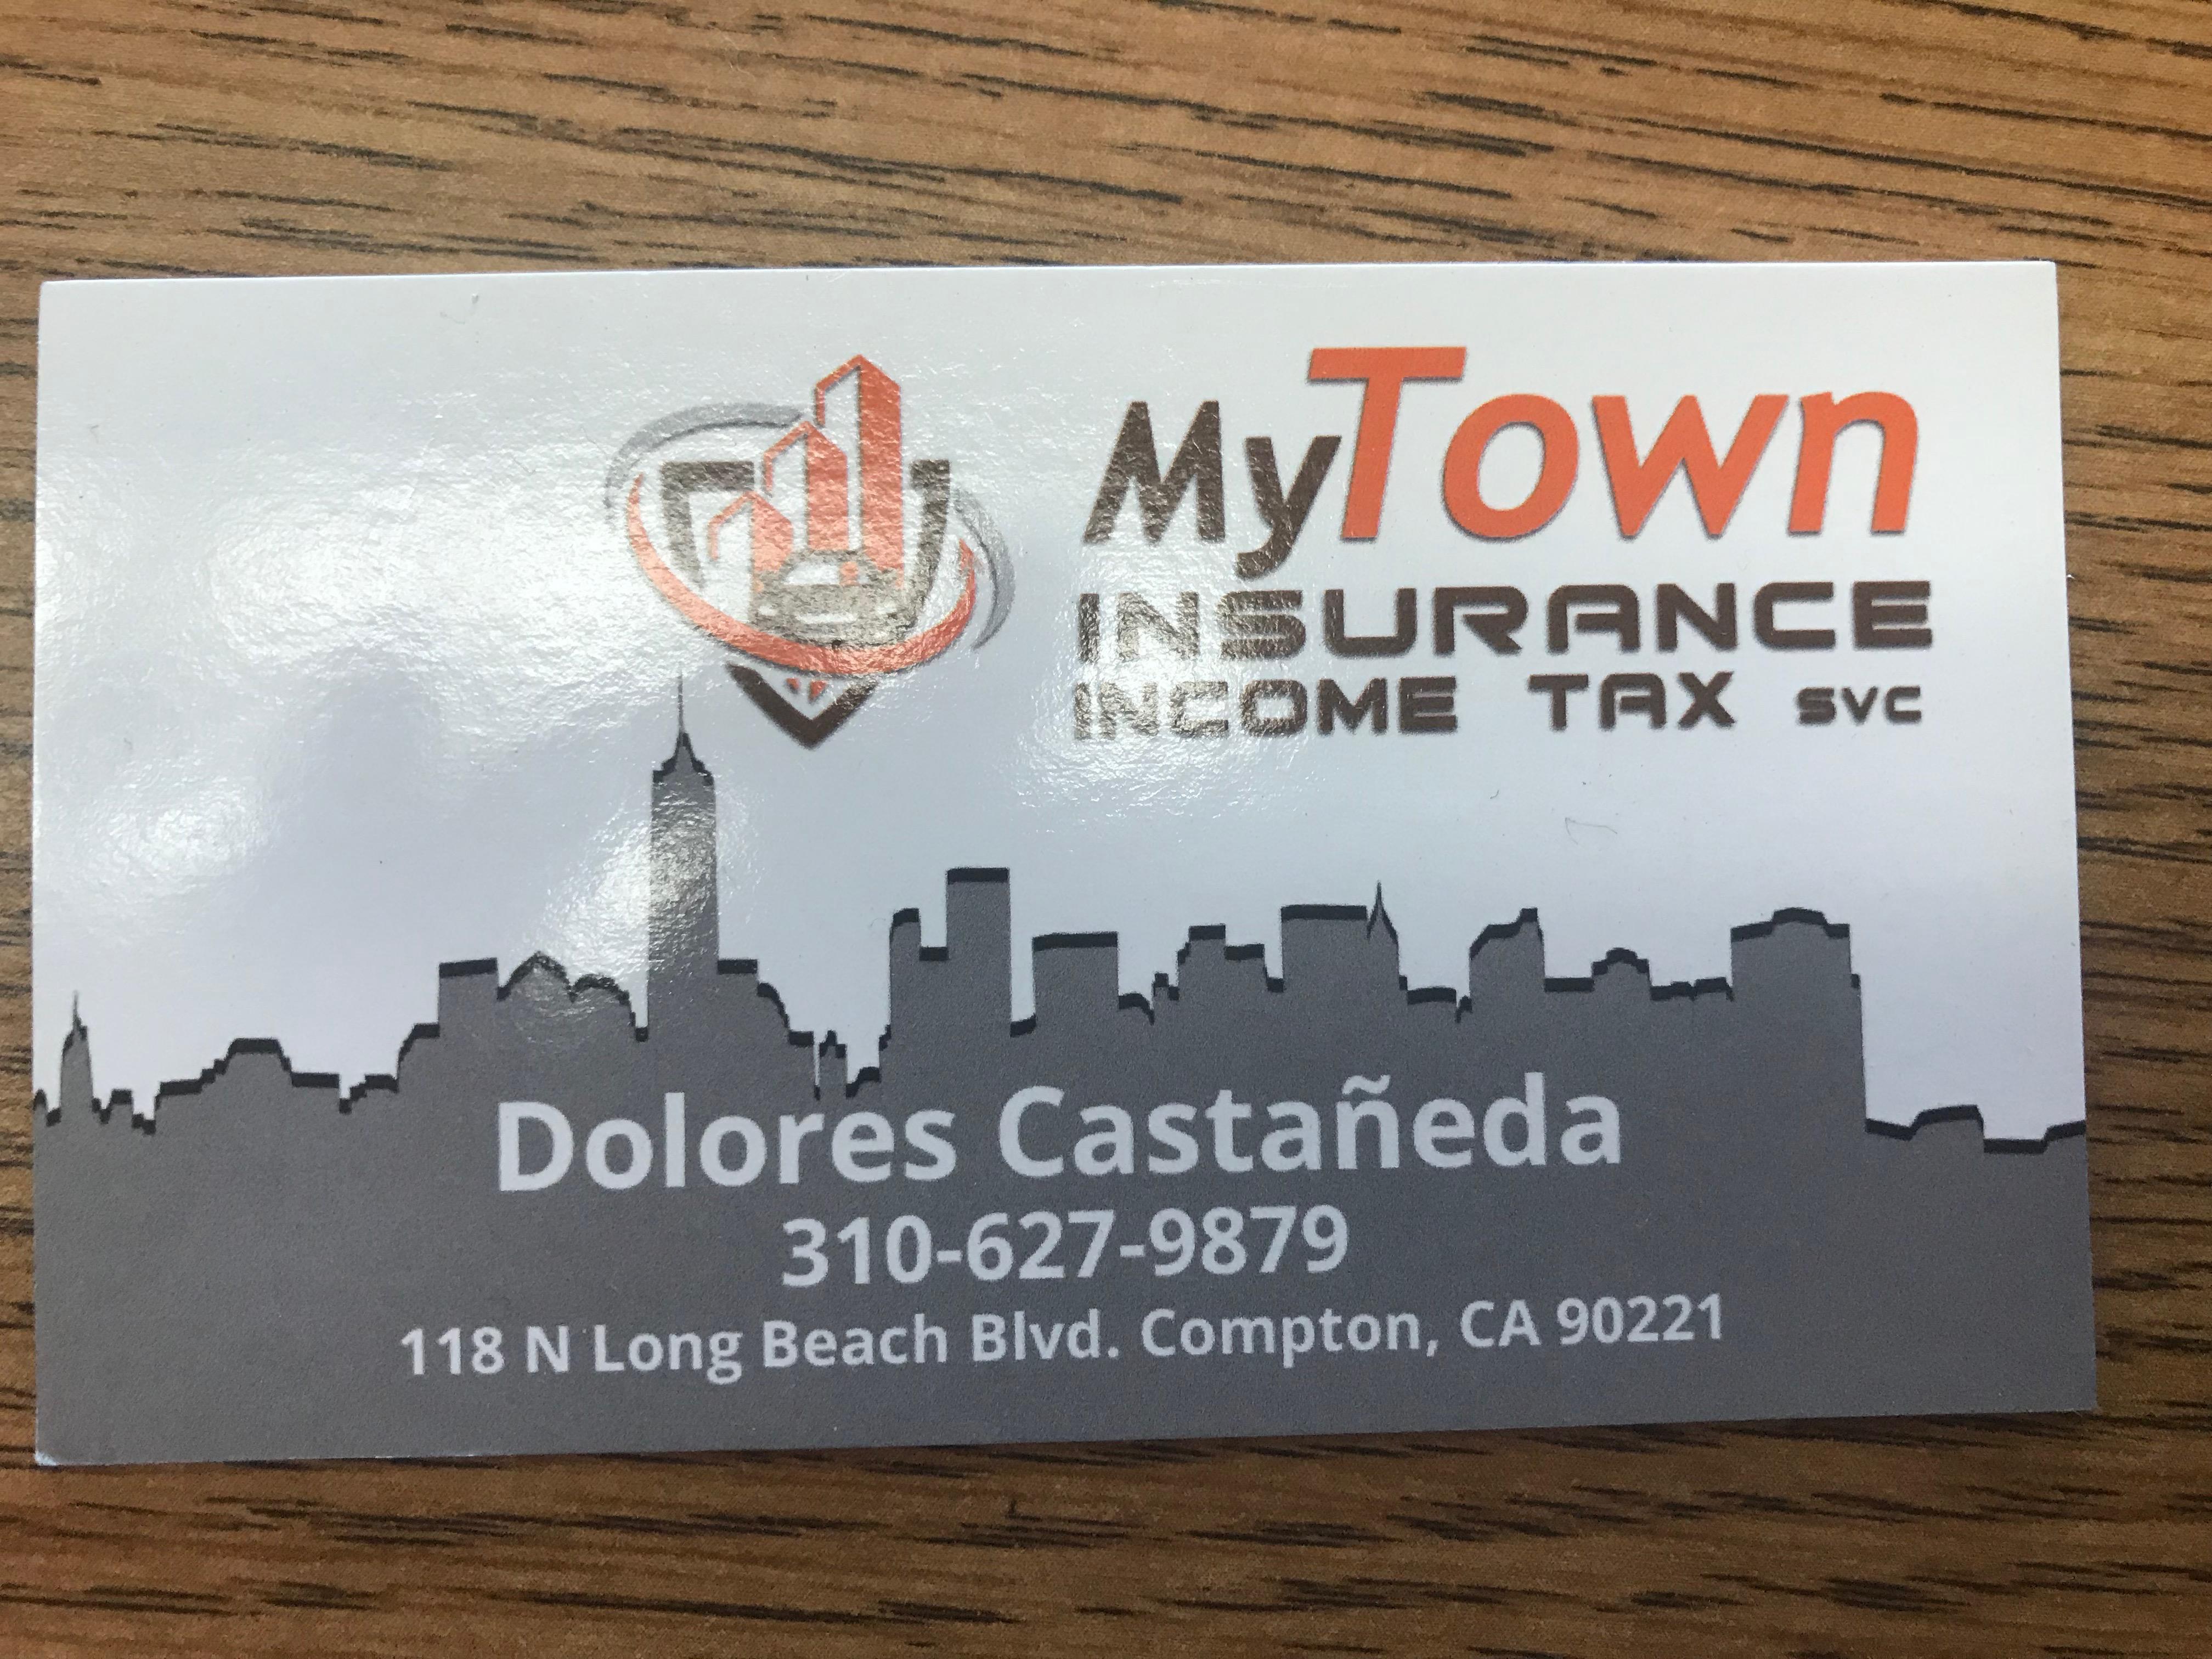 My Town Insurance Income Tax Services 118 N Long Beach Blvd Compton Ca 90221